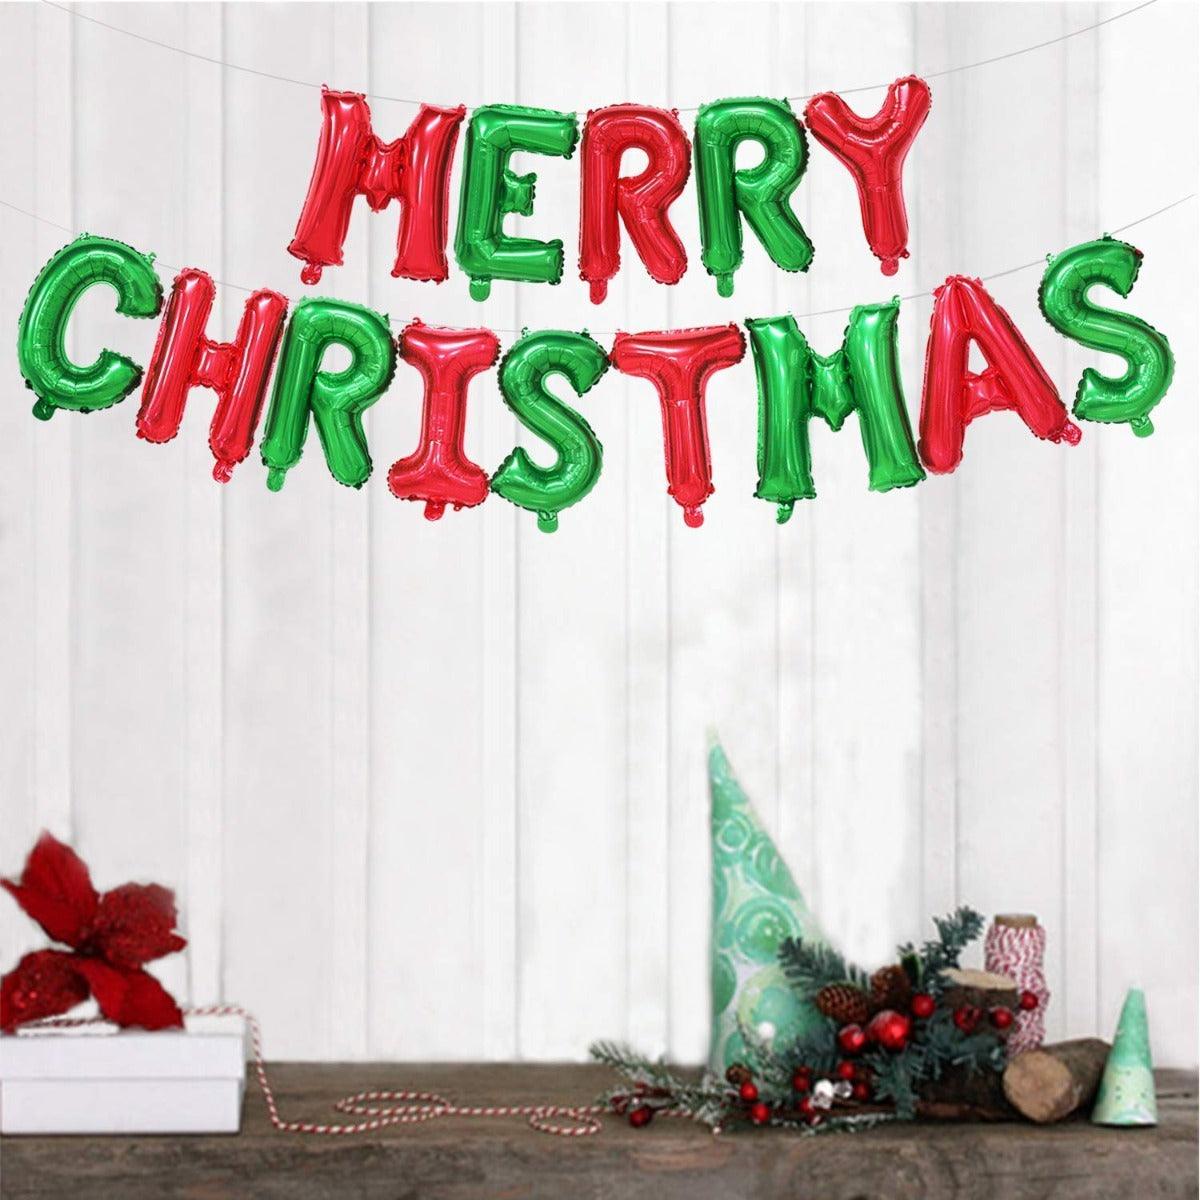 PartyCorp Merry Christmas Red & Green Foil Banner For Merry Christmas Party Decoration, 1 Piece